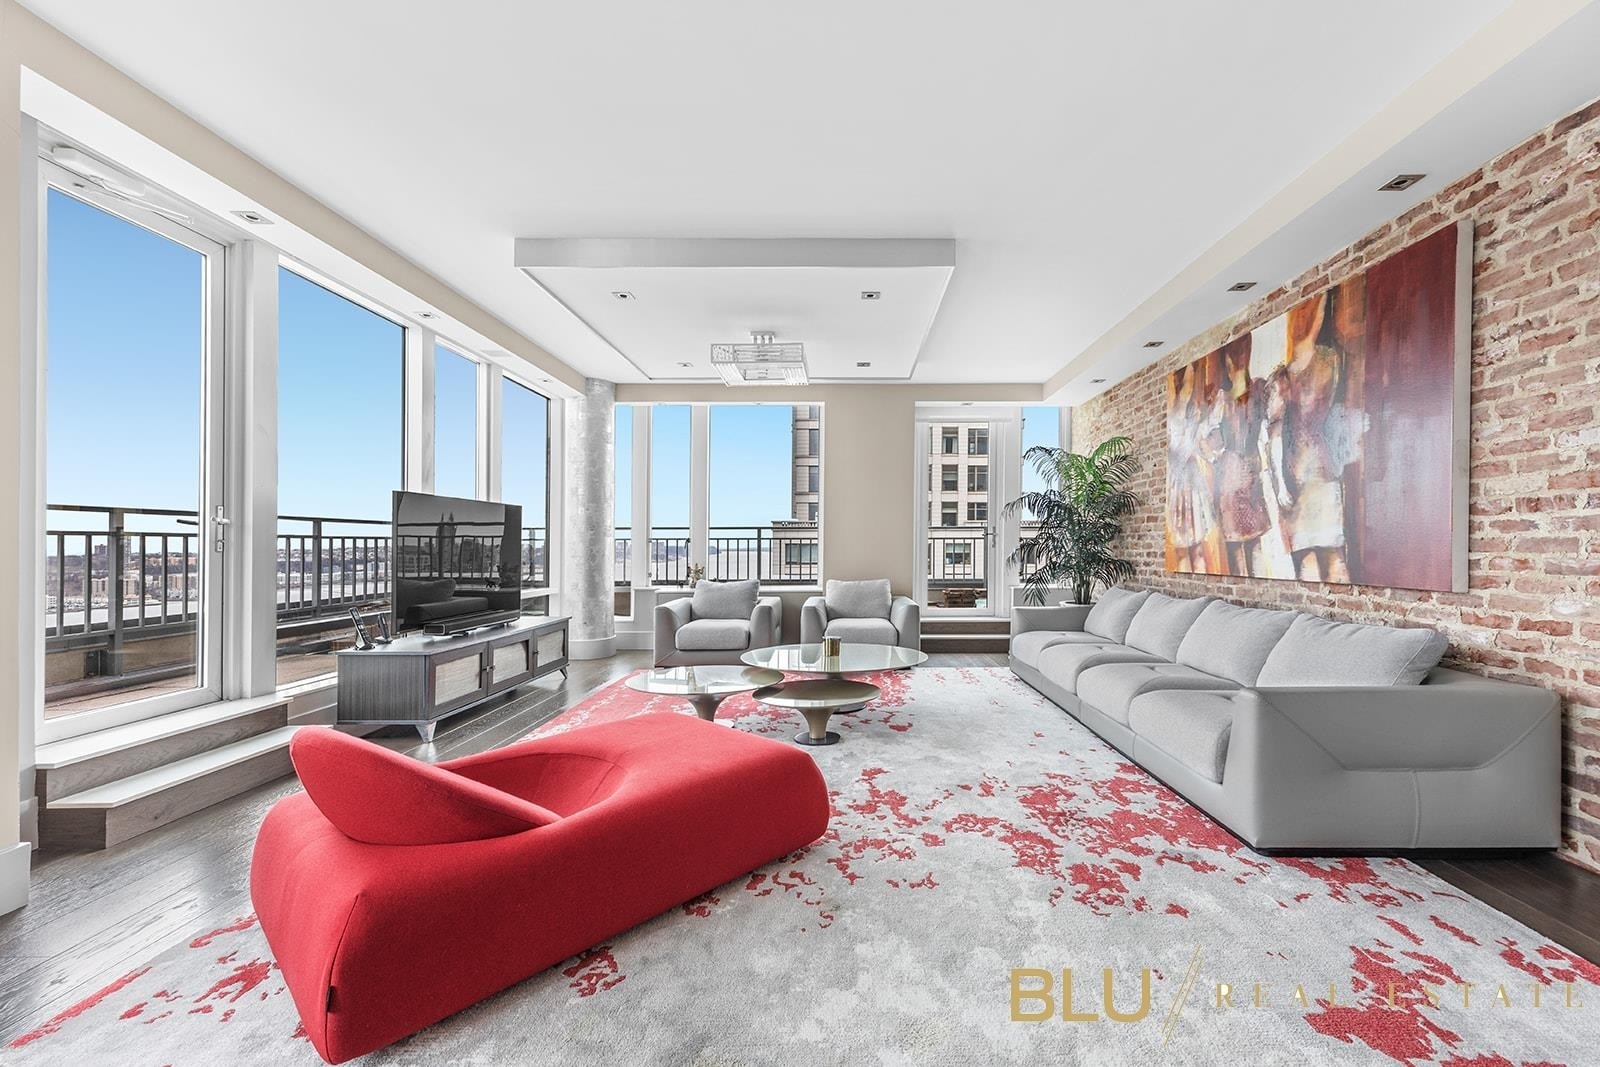 Property at 220 RIVERSIDE BLVD, 29A Lincoln Square, New York, New York 10069